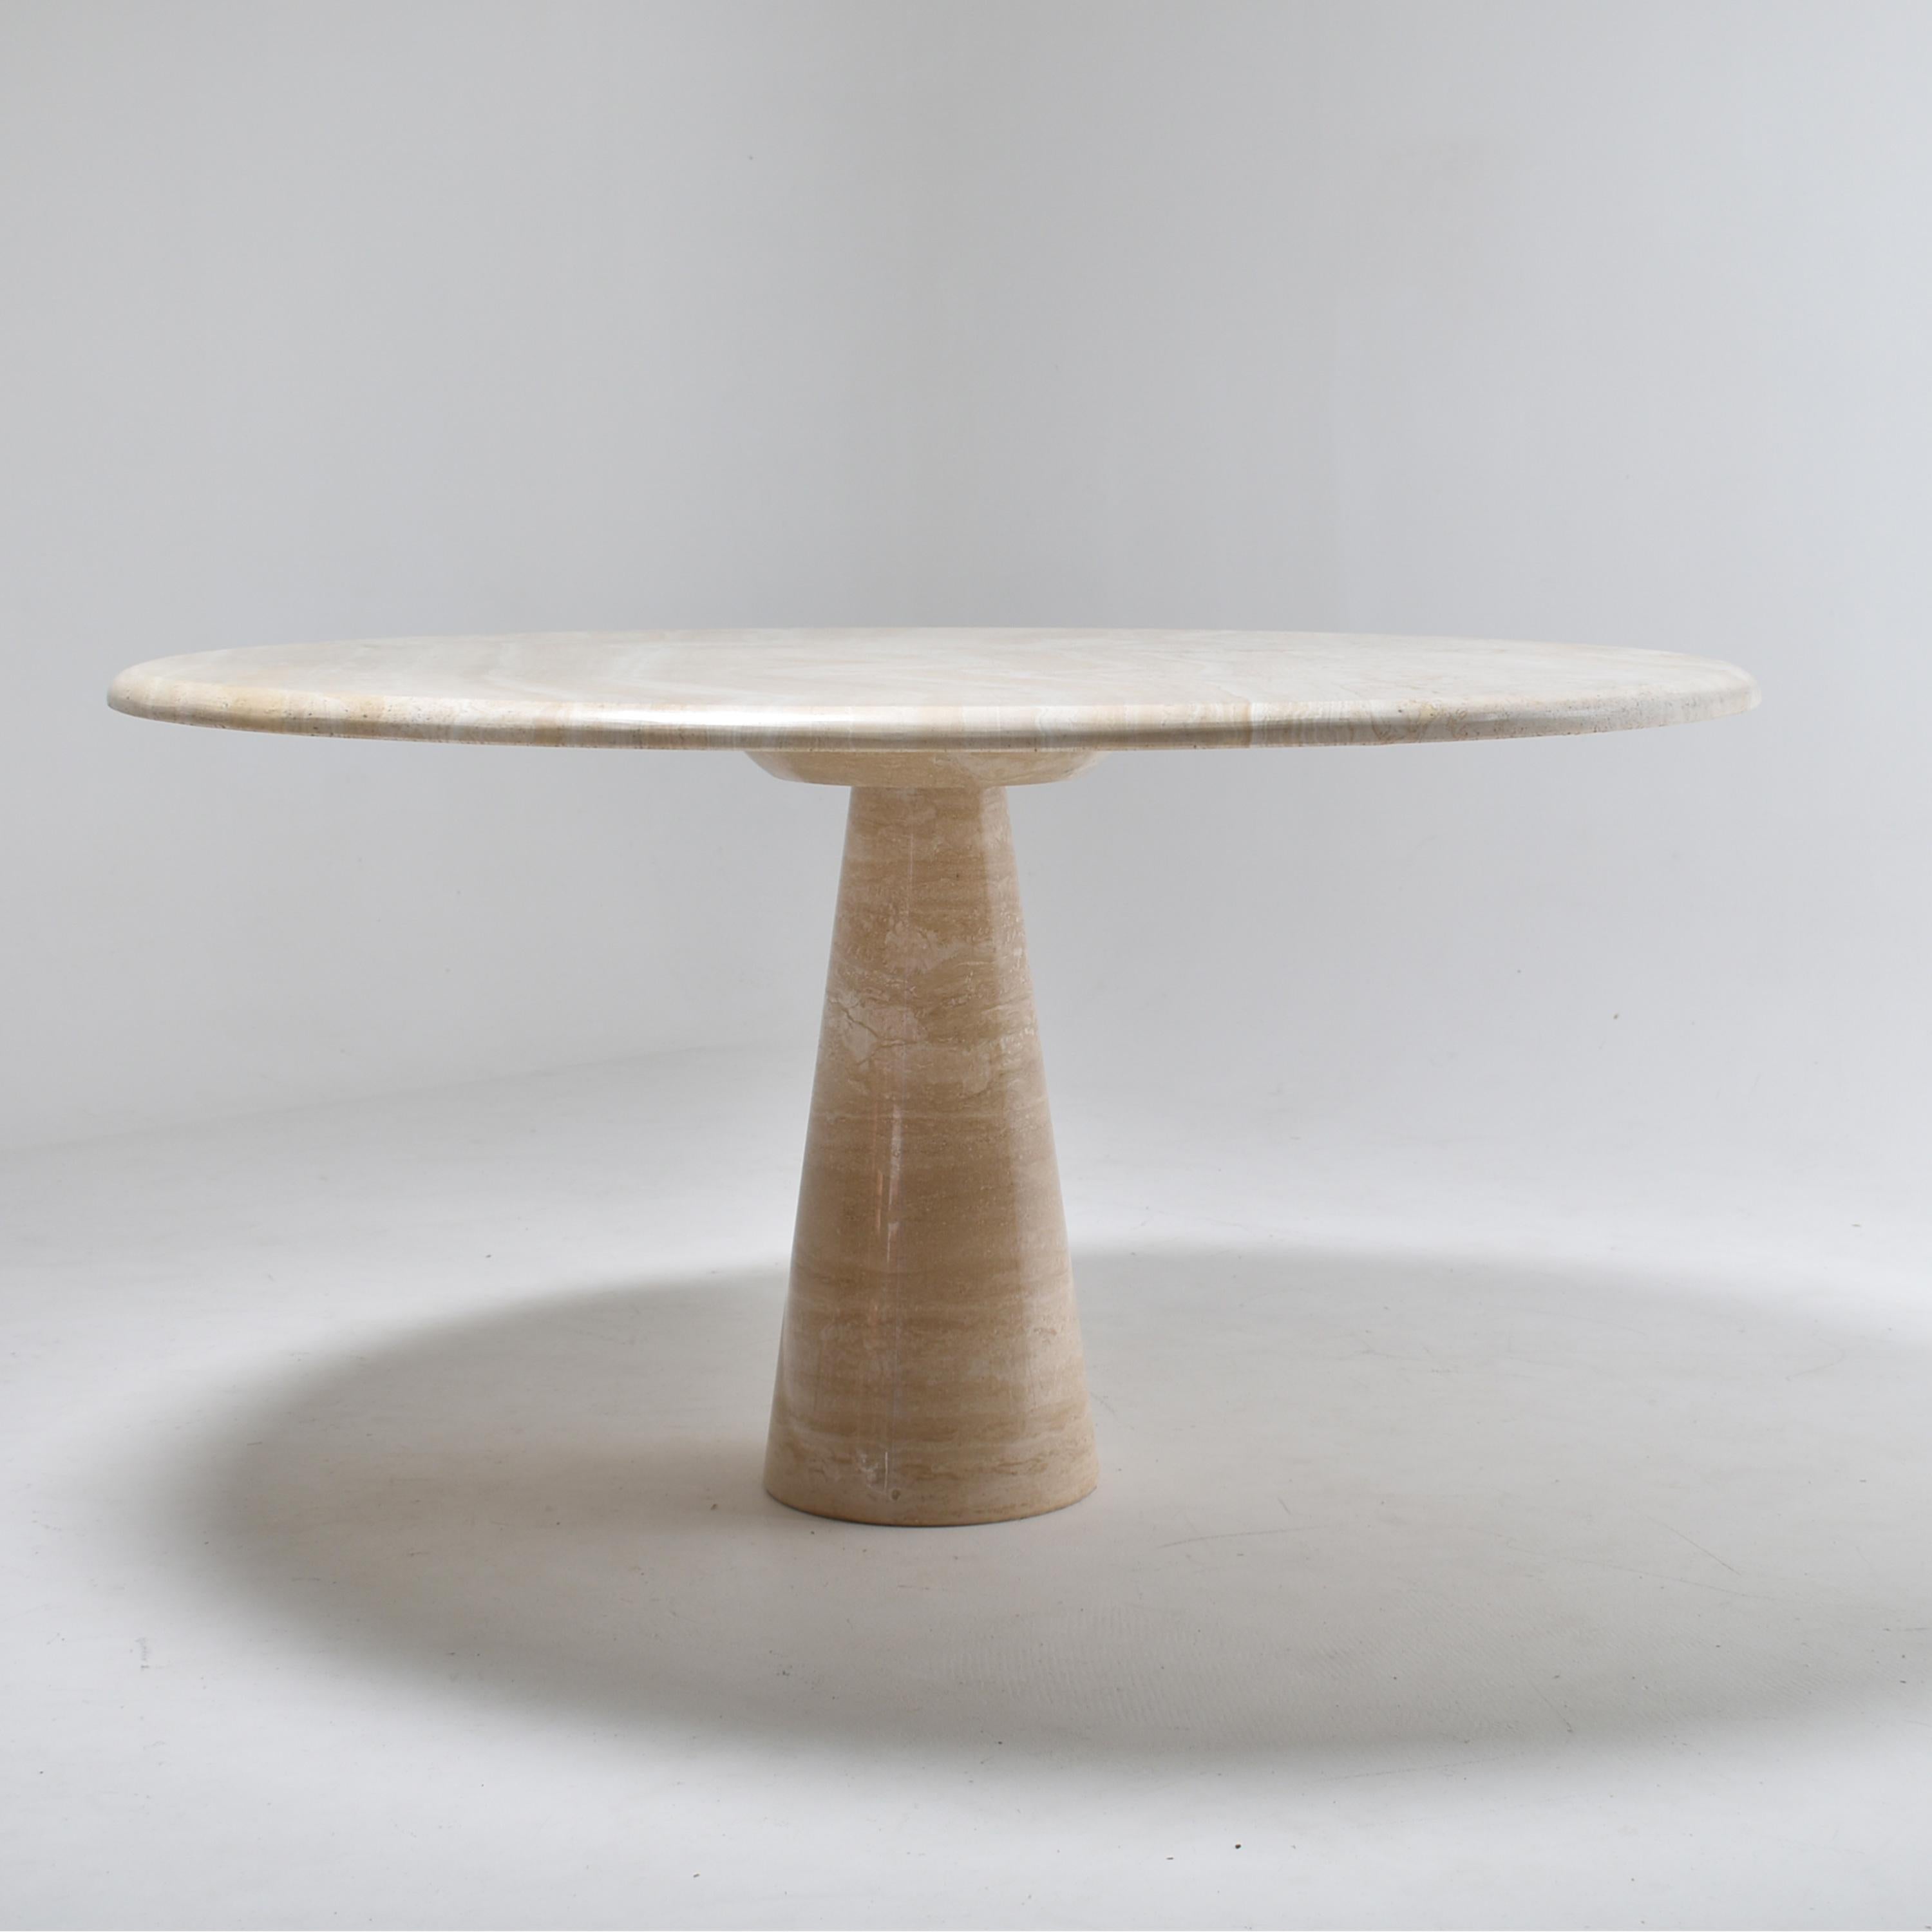 Mid-Century Modern dining table in cream travertine.
The round top is sitting on a pedestal leg, in the manner of Angelo Mangiarotti tables
The top, as the leg, shows very nice stone's veins.
Both are in very good condition. 
This table was on